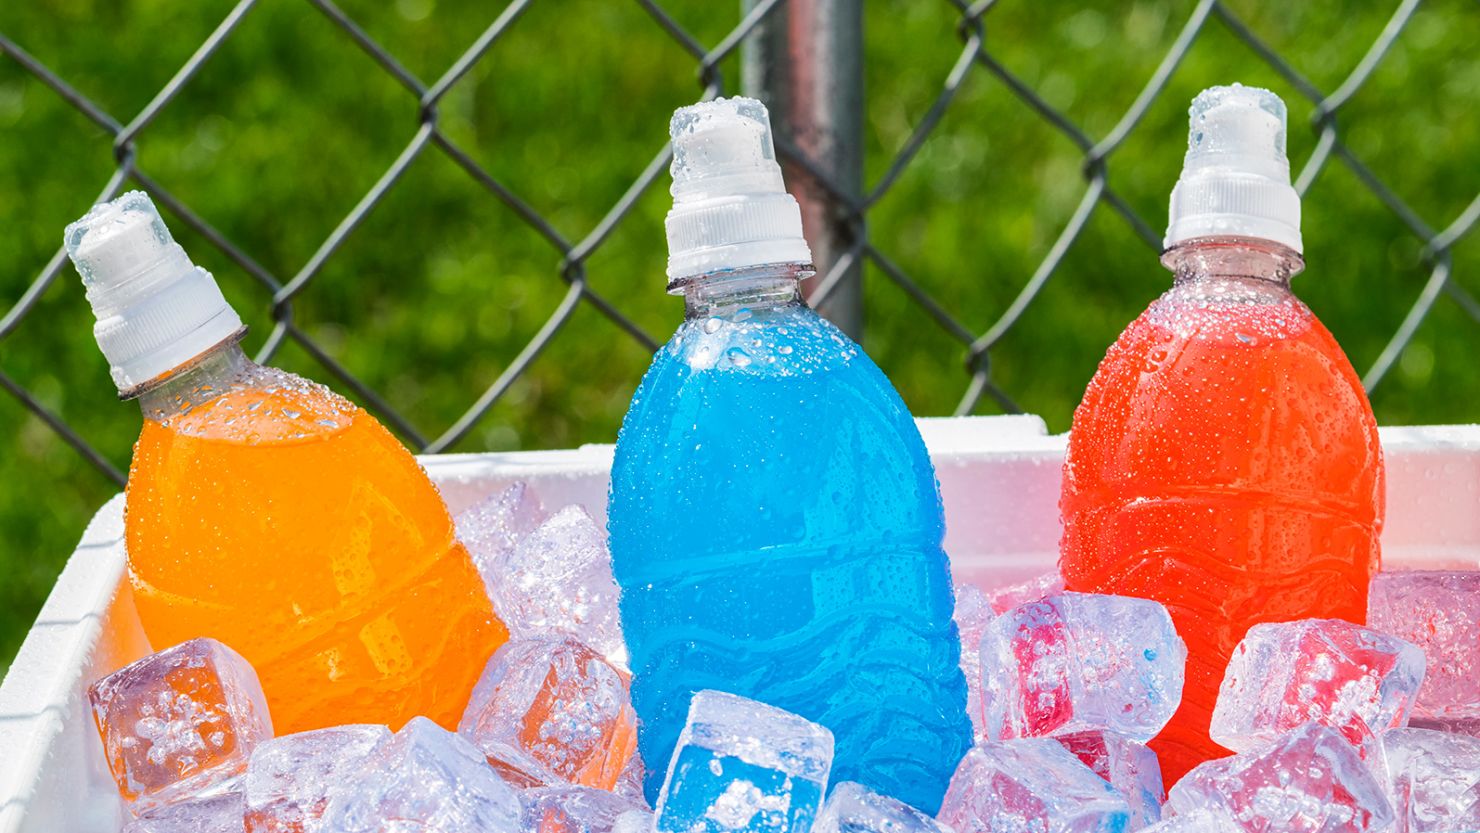 Powerade updates label on plastic bottle – Grocer On a Mission